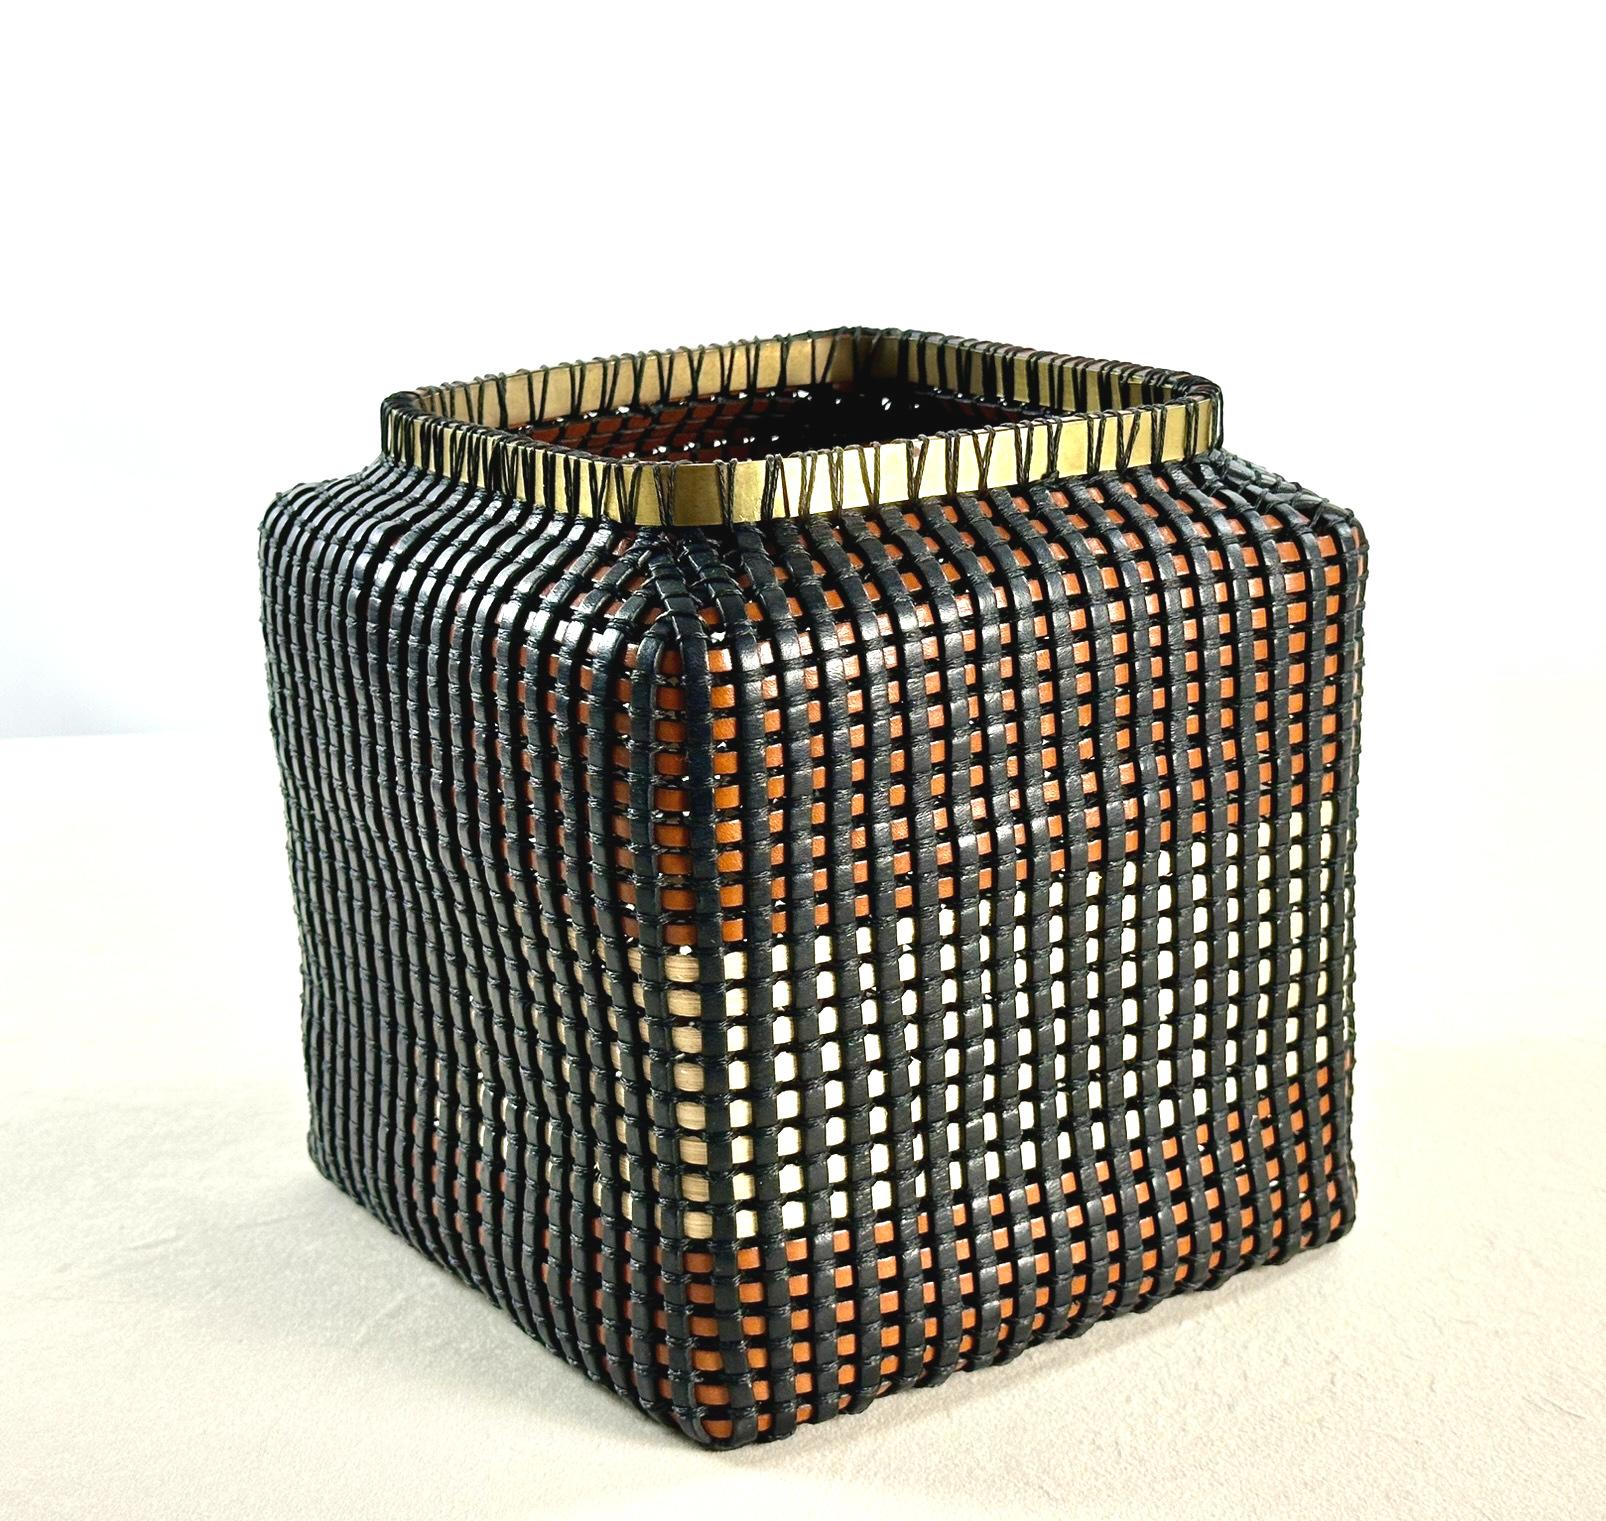 Contemporary Chinese Tibor Inspired Leather & Cane Handmade Basket Black, Tan & Ivory Color For Sale